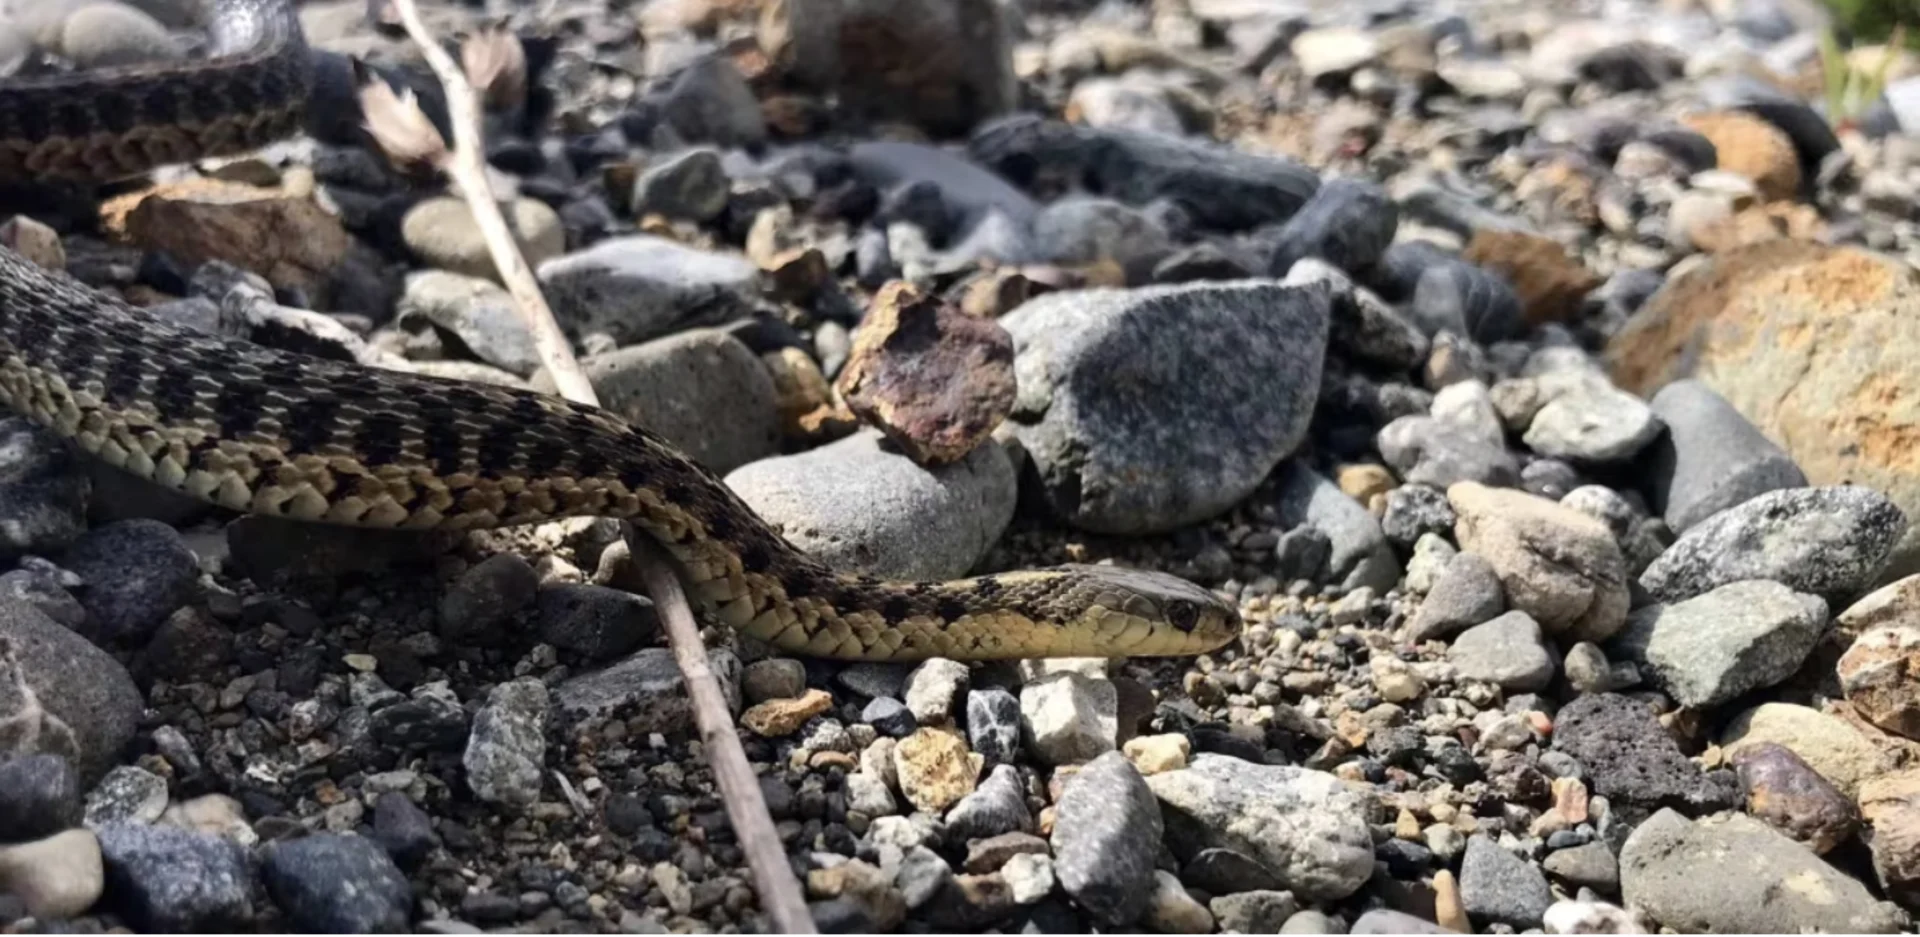 Contrary to popular belief, snakes CAN be found in this part of Atlantic Canada